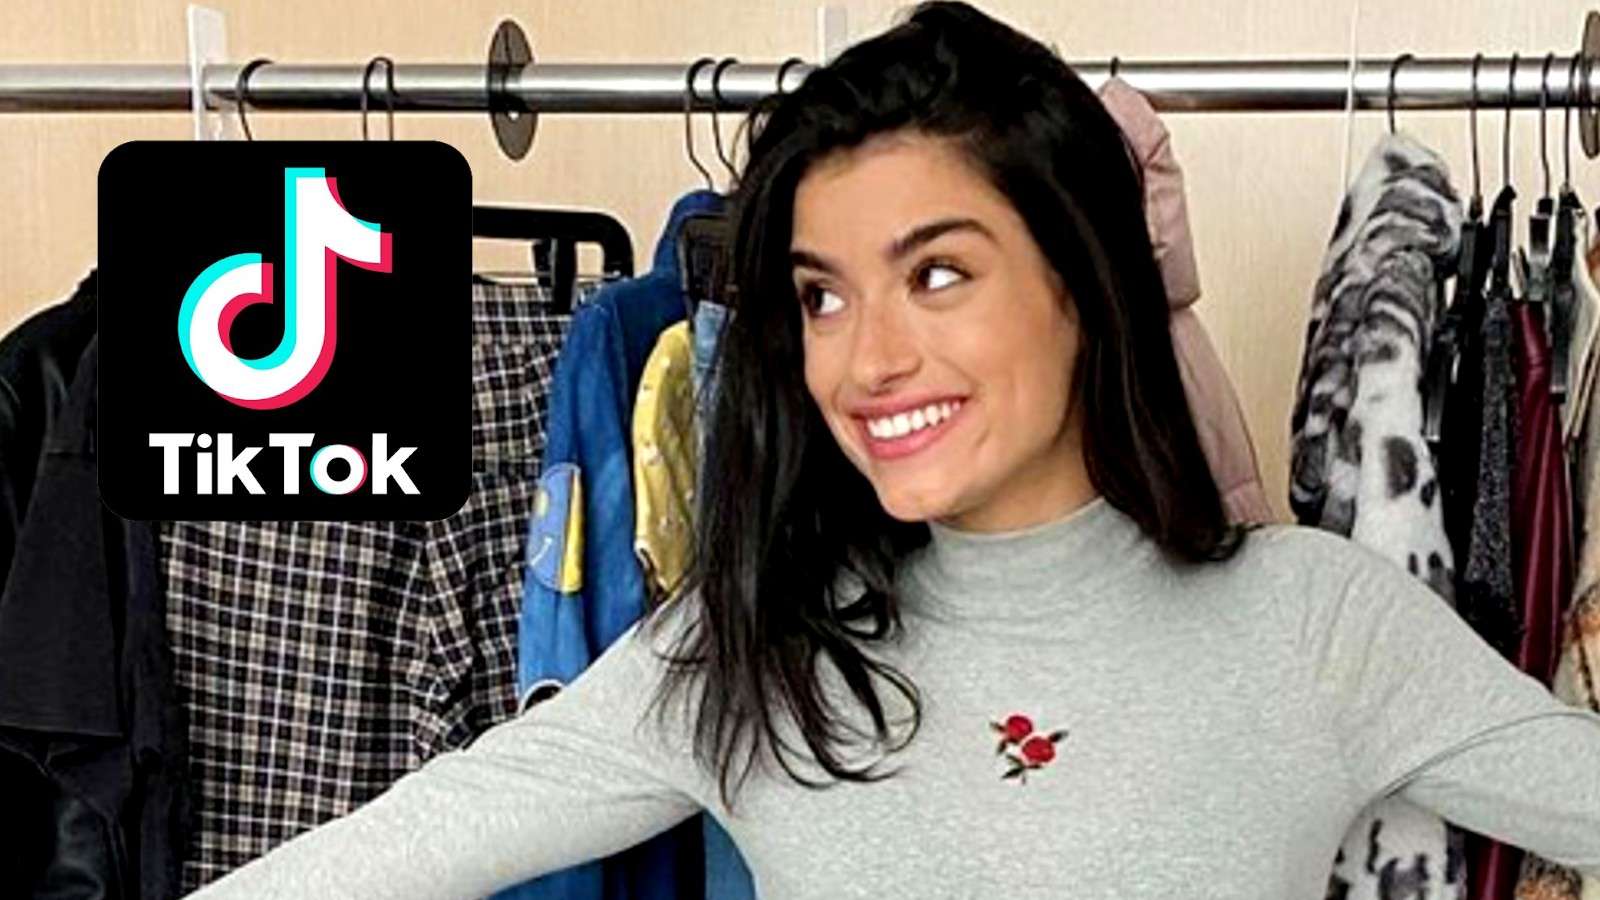 Dixie D'Amelio stands in front of clothes next to the TikTok logo